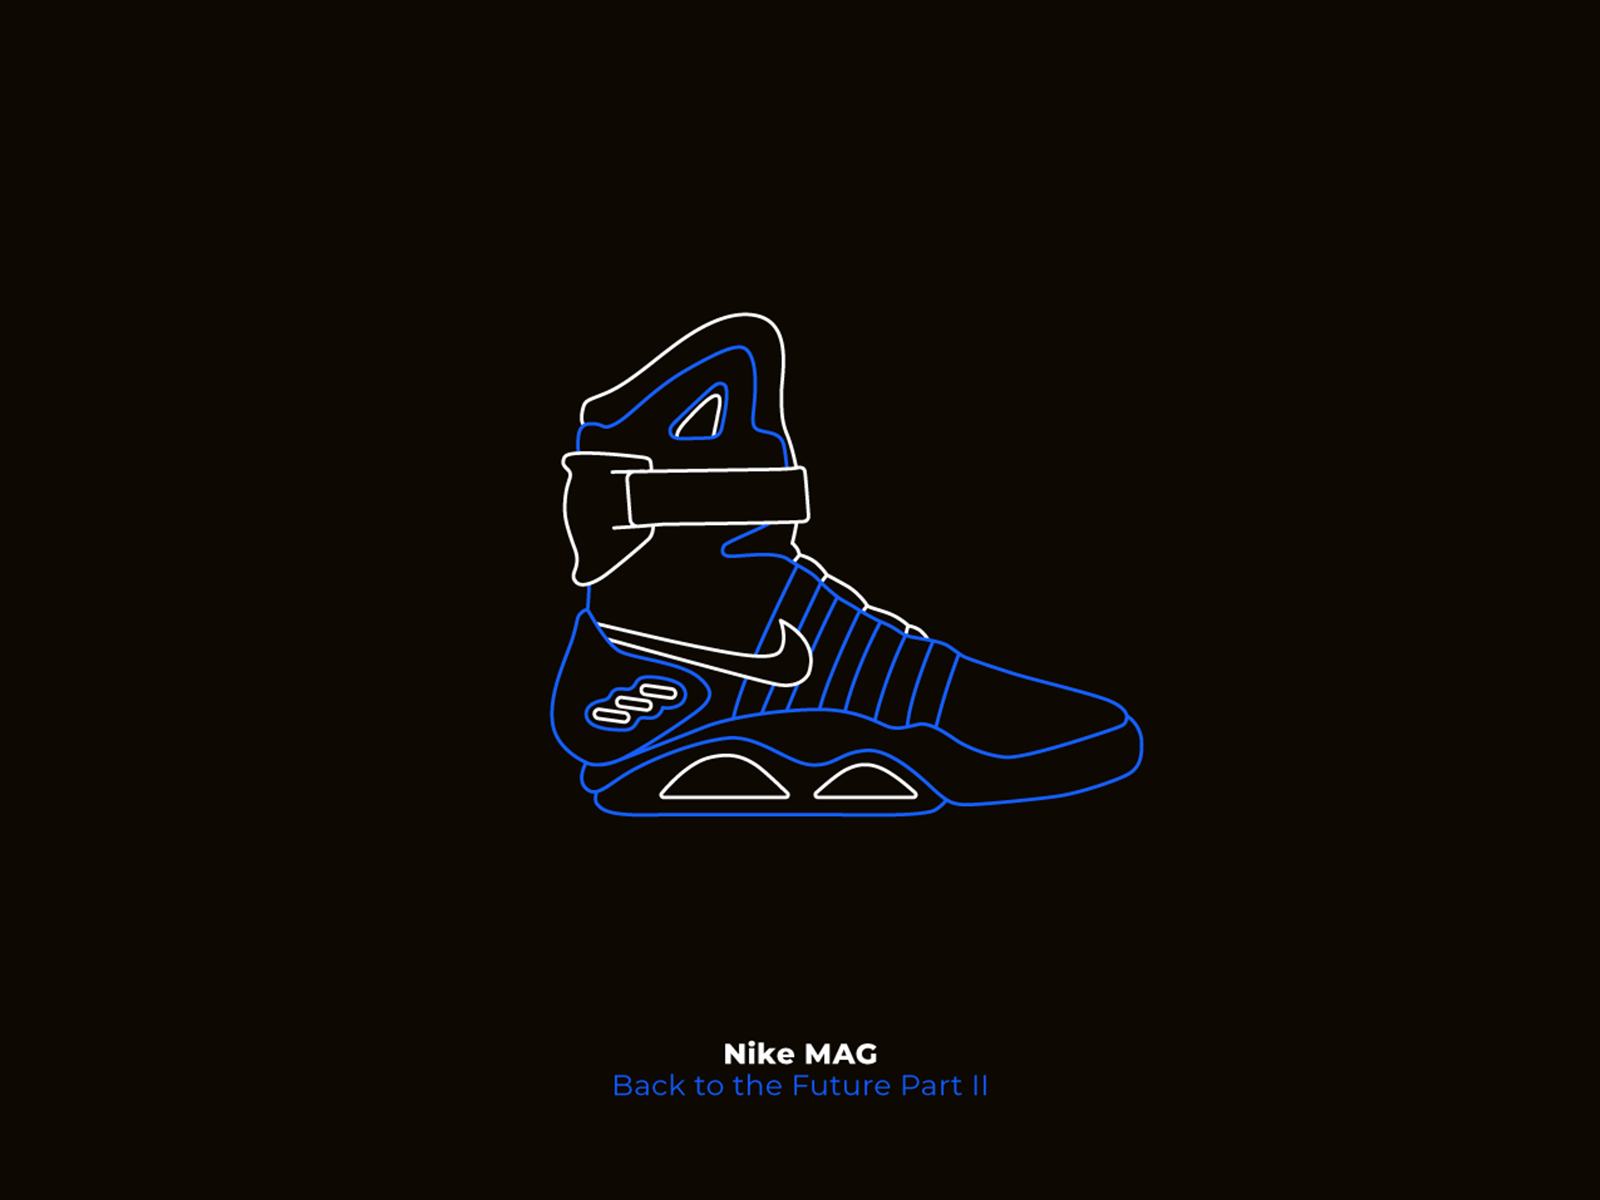 Nike MAG | to the Future by Stas Solomakhin on Dribbble